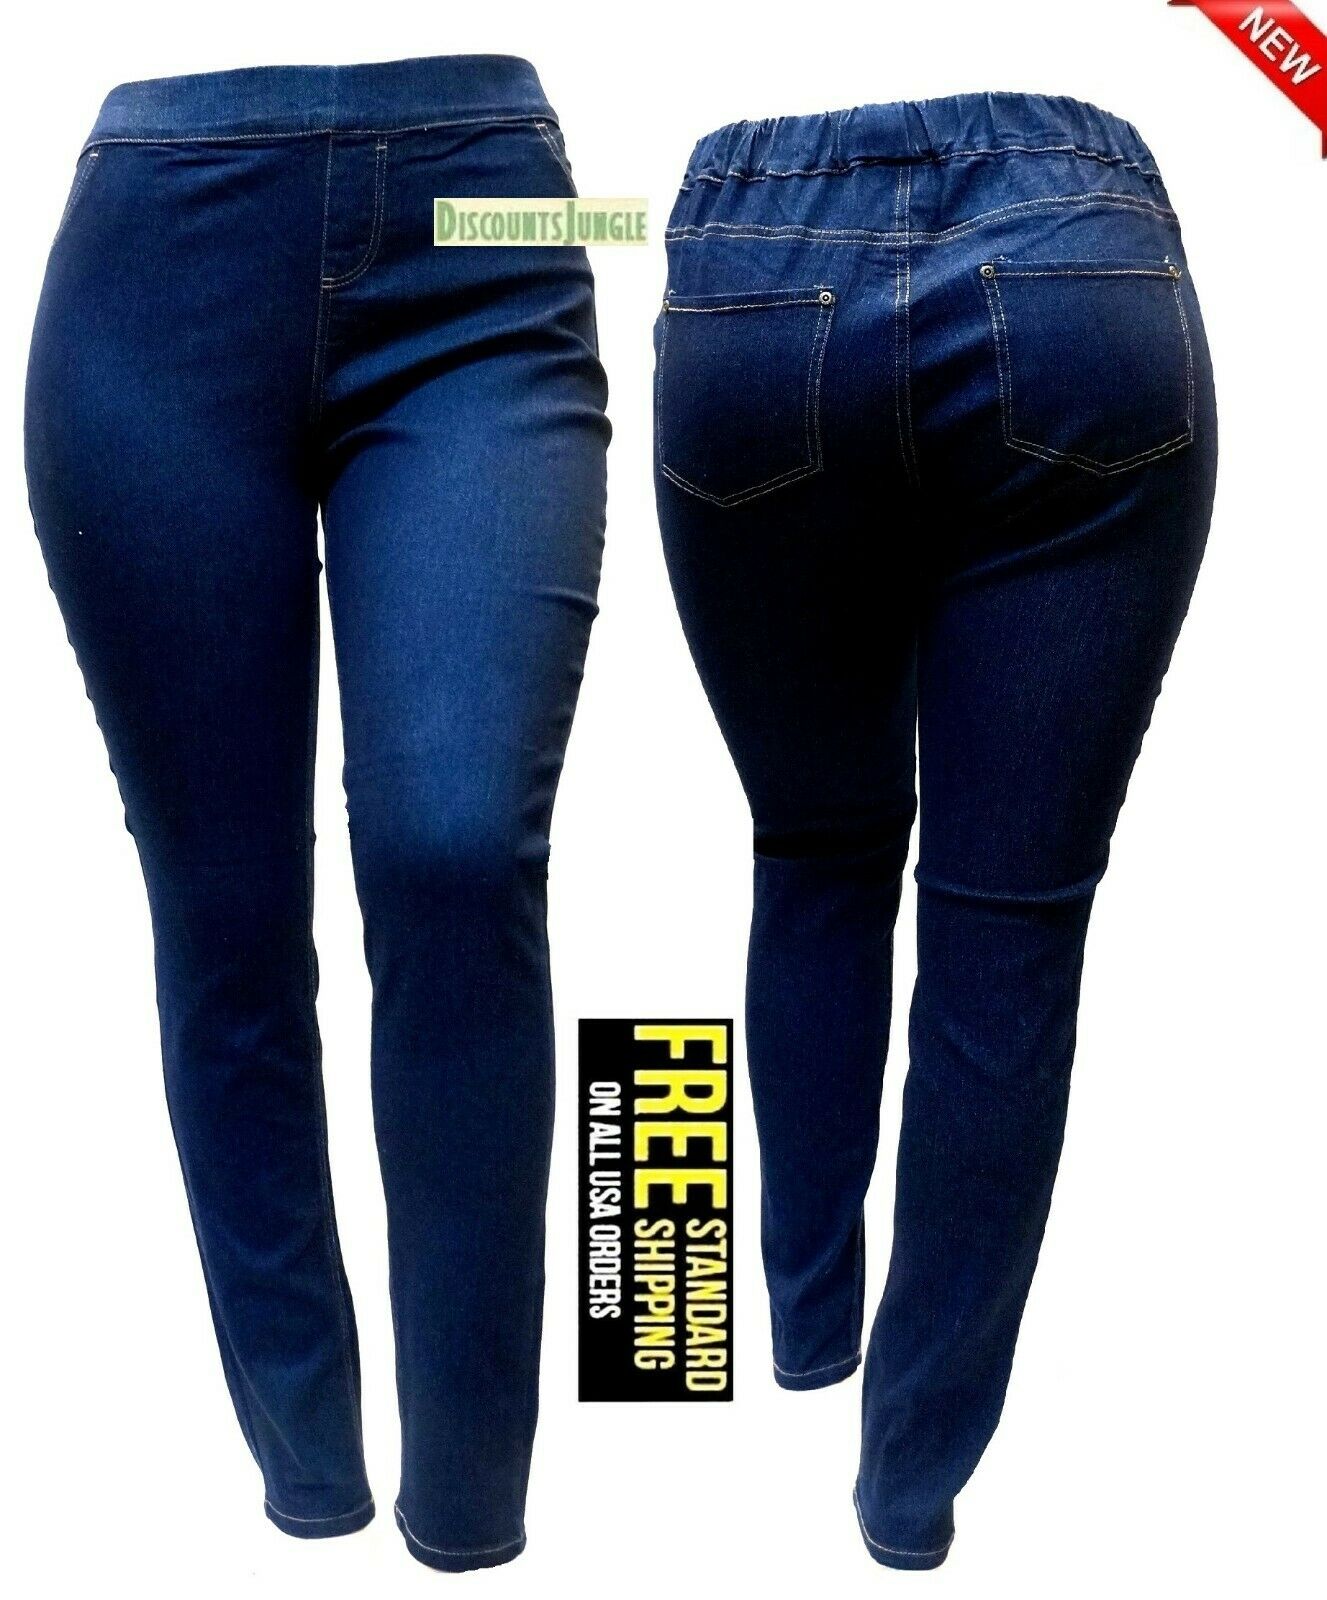 Sexy Diva Womens Plus Size Denim Jeans Elastic Waist Pull On Stretch Push Up-new